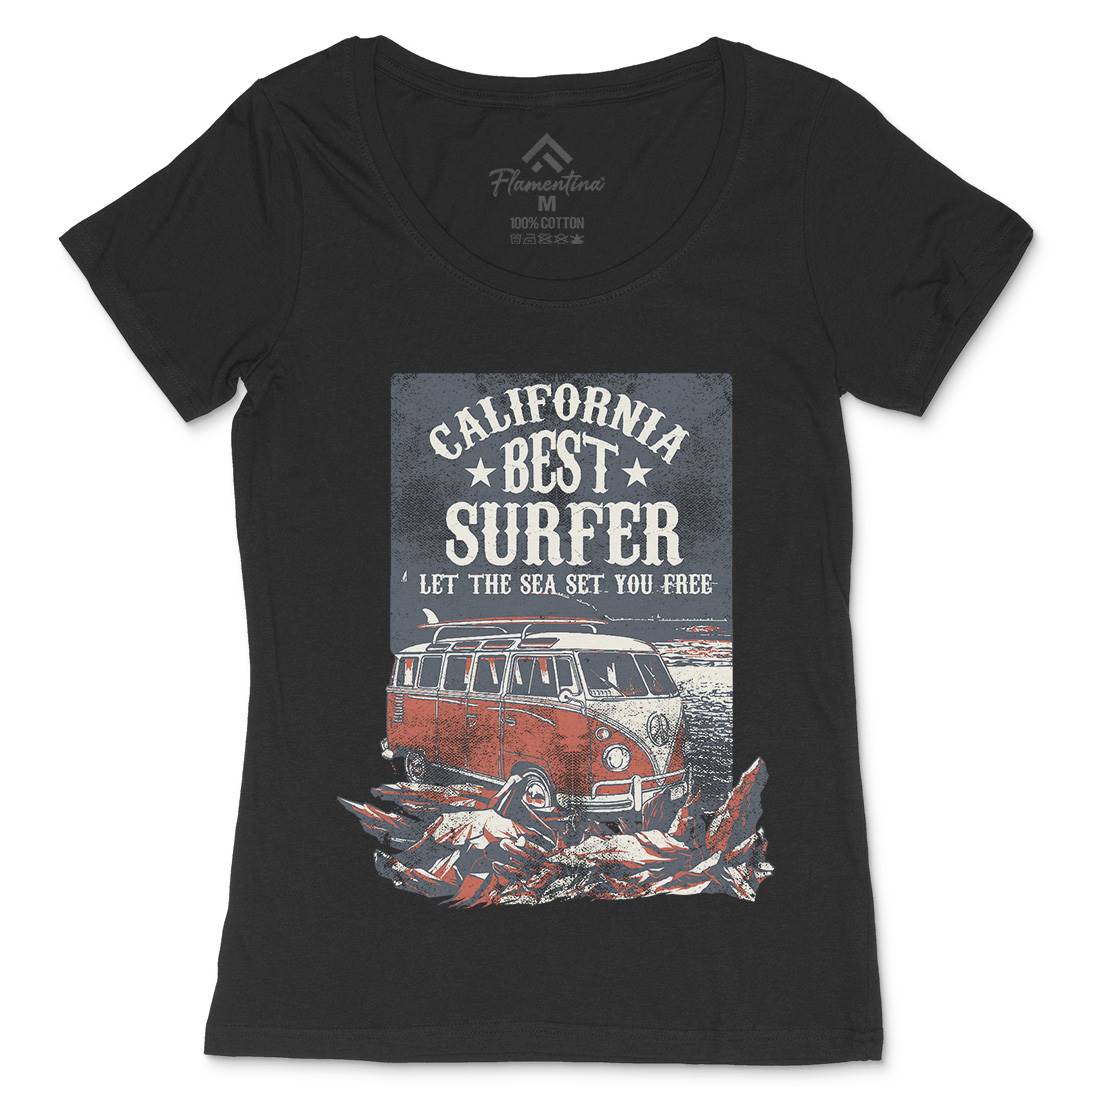 Let The Sea Set You Free Womens Scoop Neck T-Shirt Surf C956